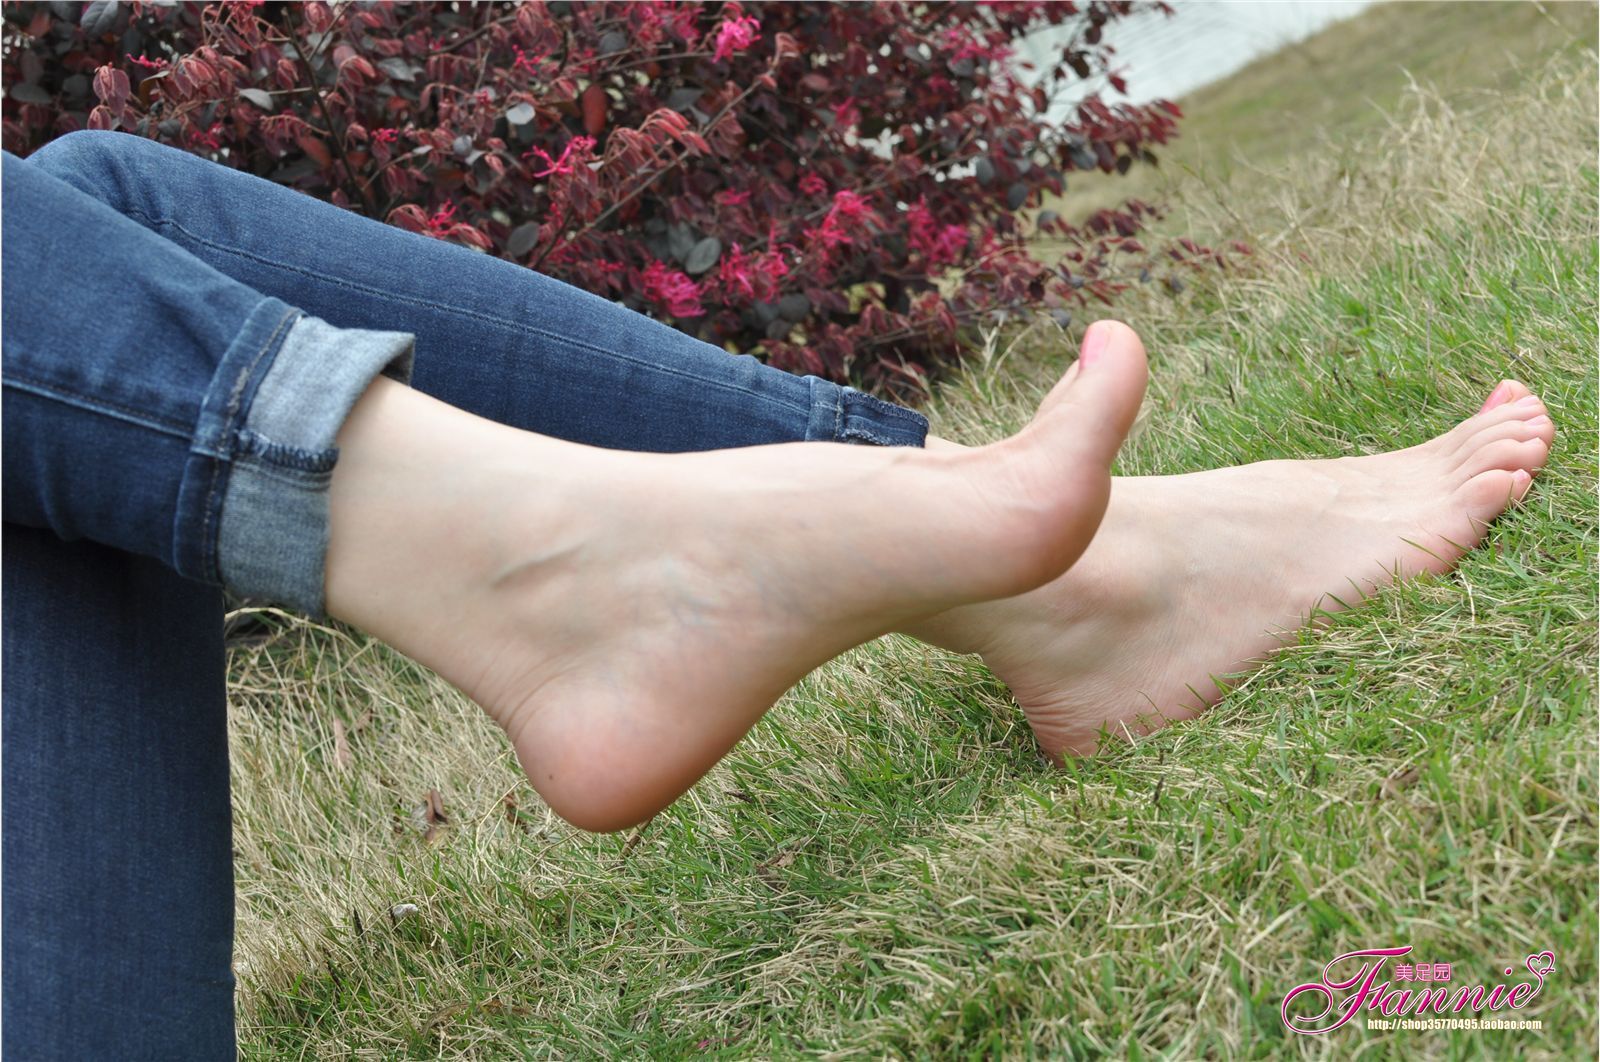 Fanny's feet: willow and spring